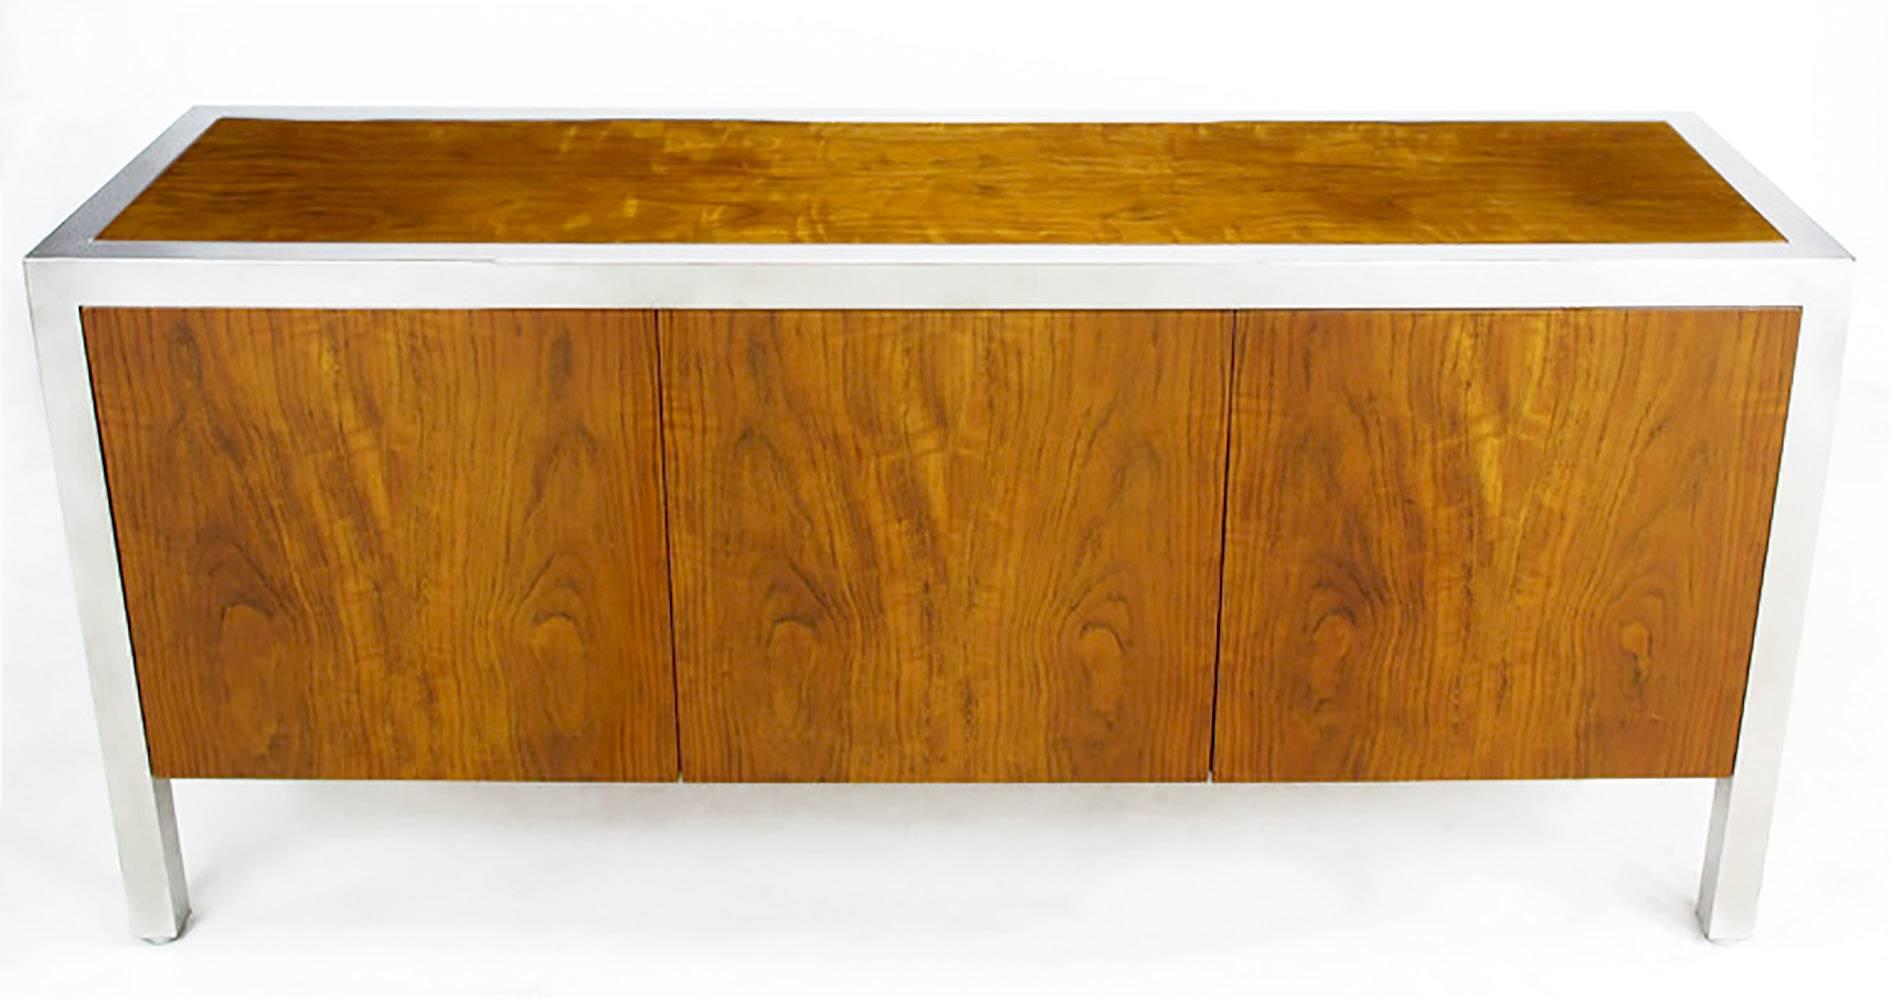 Rare Pace Collection sideboard/cabinet in highly figured and iridescent fiddleback koa wood. Heavy polished steel frame supports the cabinet on every side with parsons style simplicity. Beautiful wood grain with an iridescent property that reveals